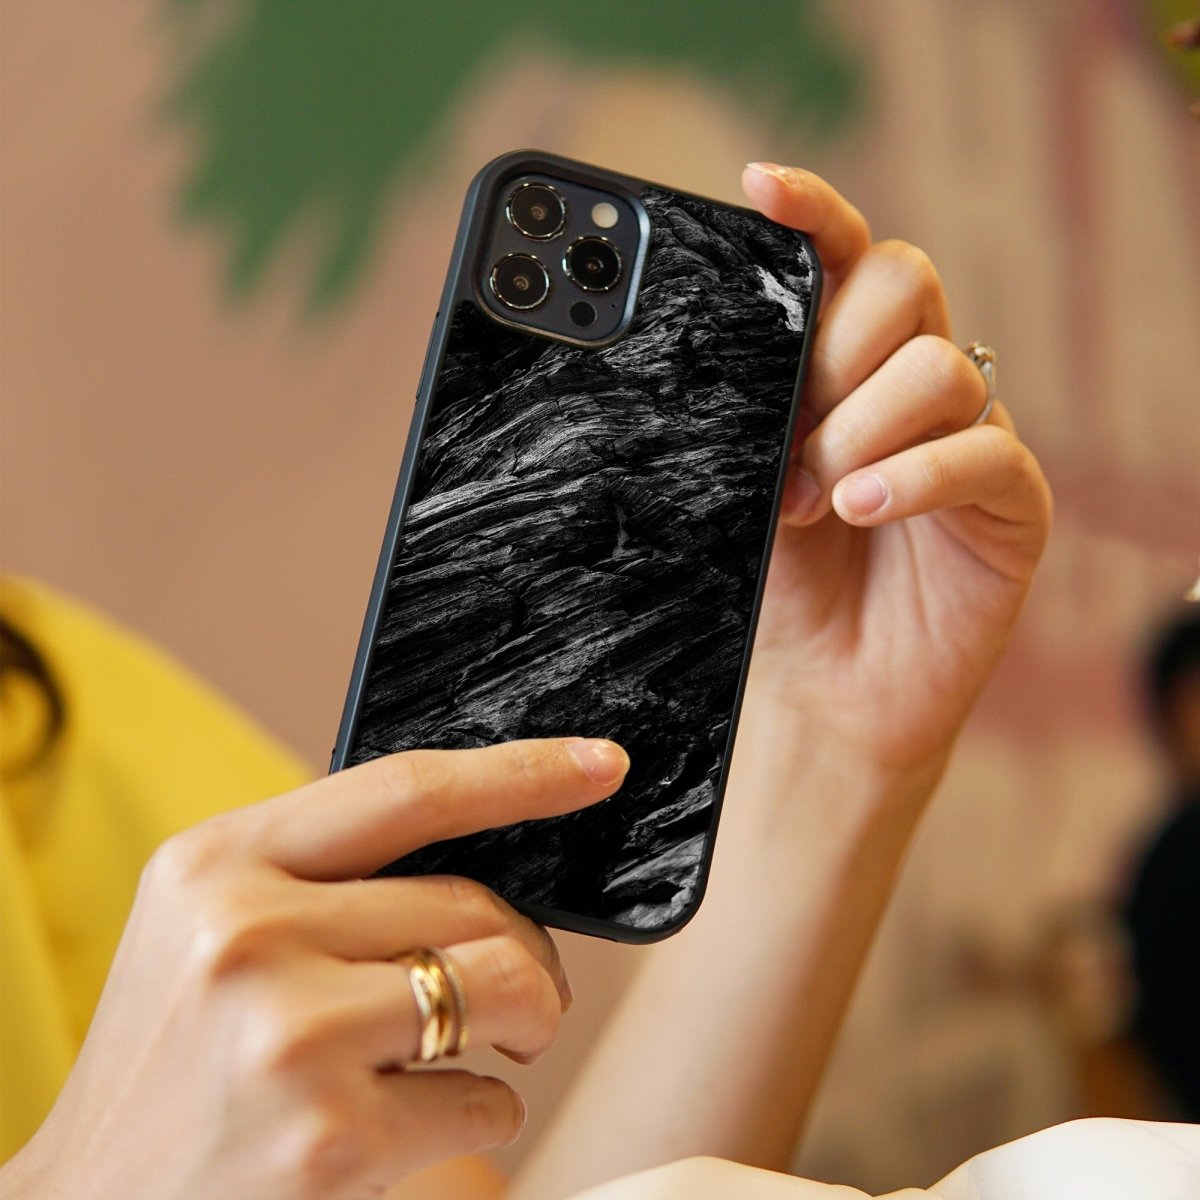 Charcoal Marble Stone - Glass Phone Case - cmzart